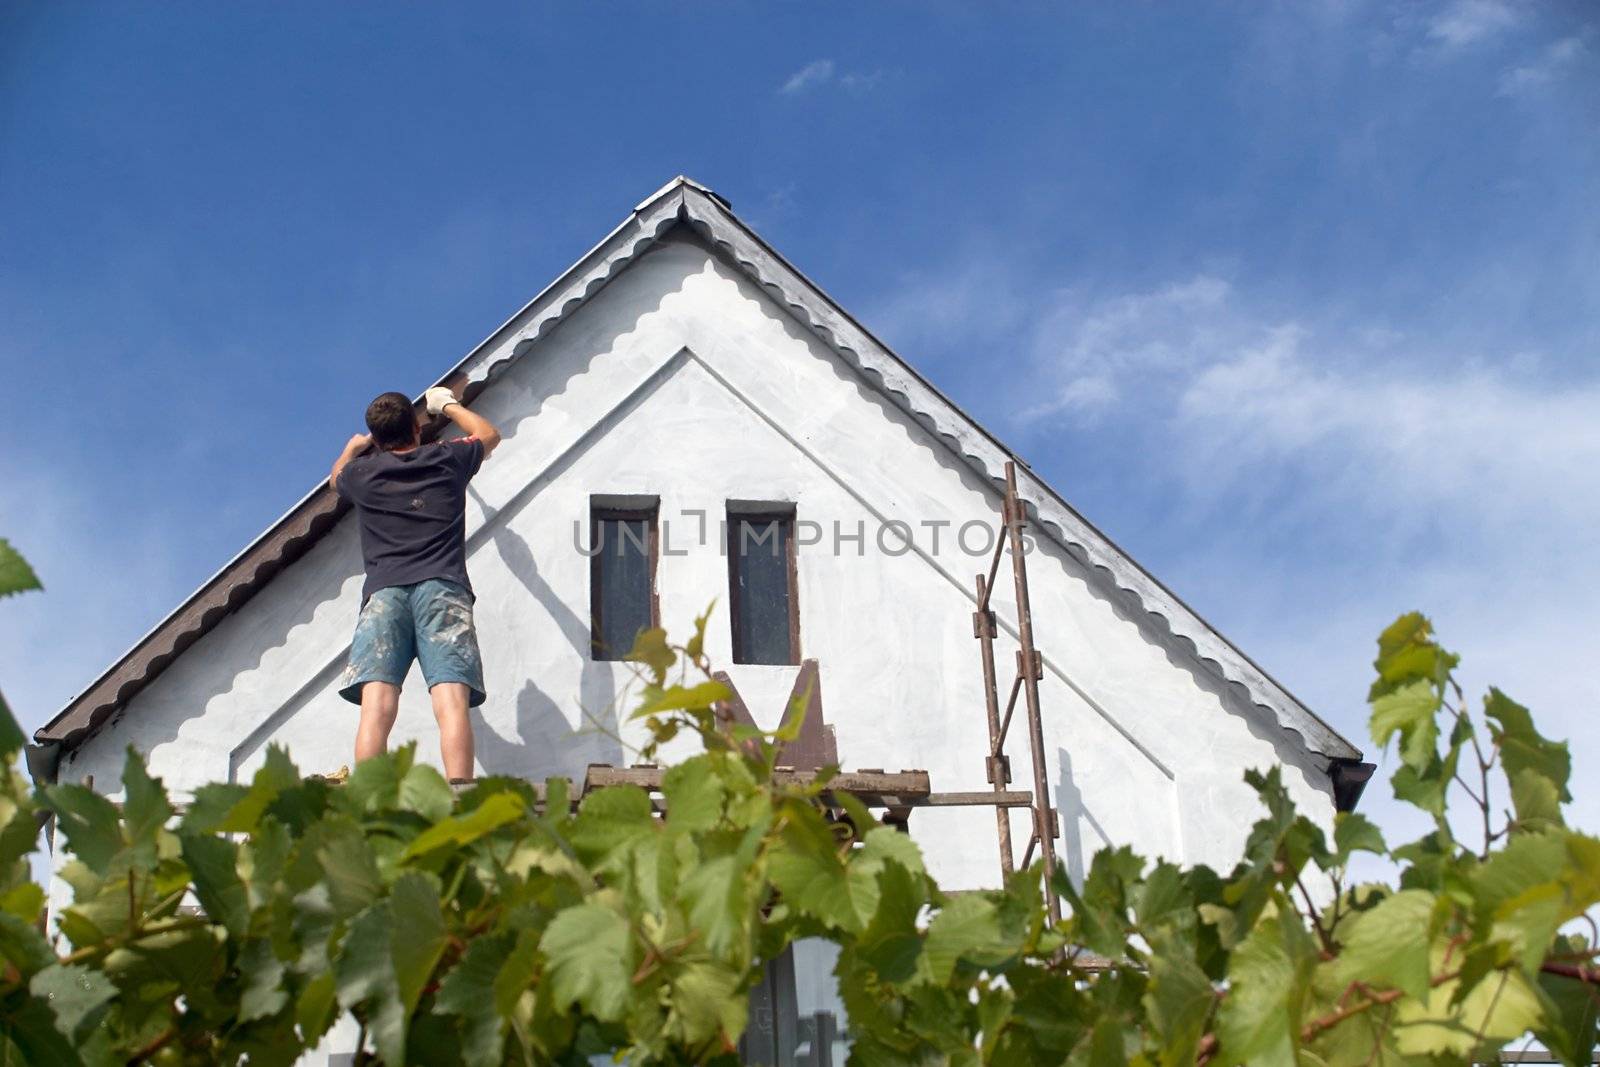 The man paints a roof of the house